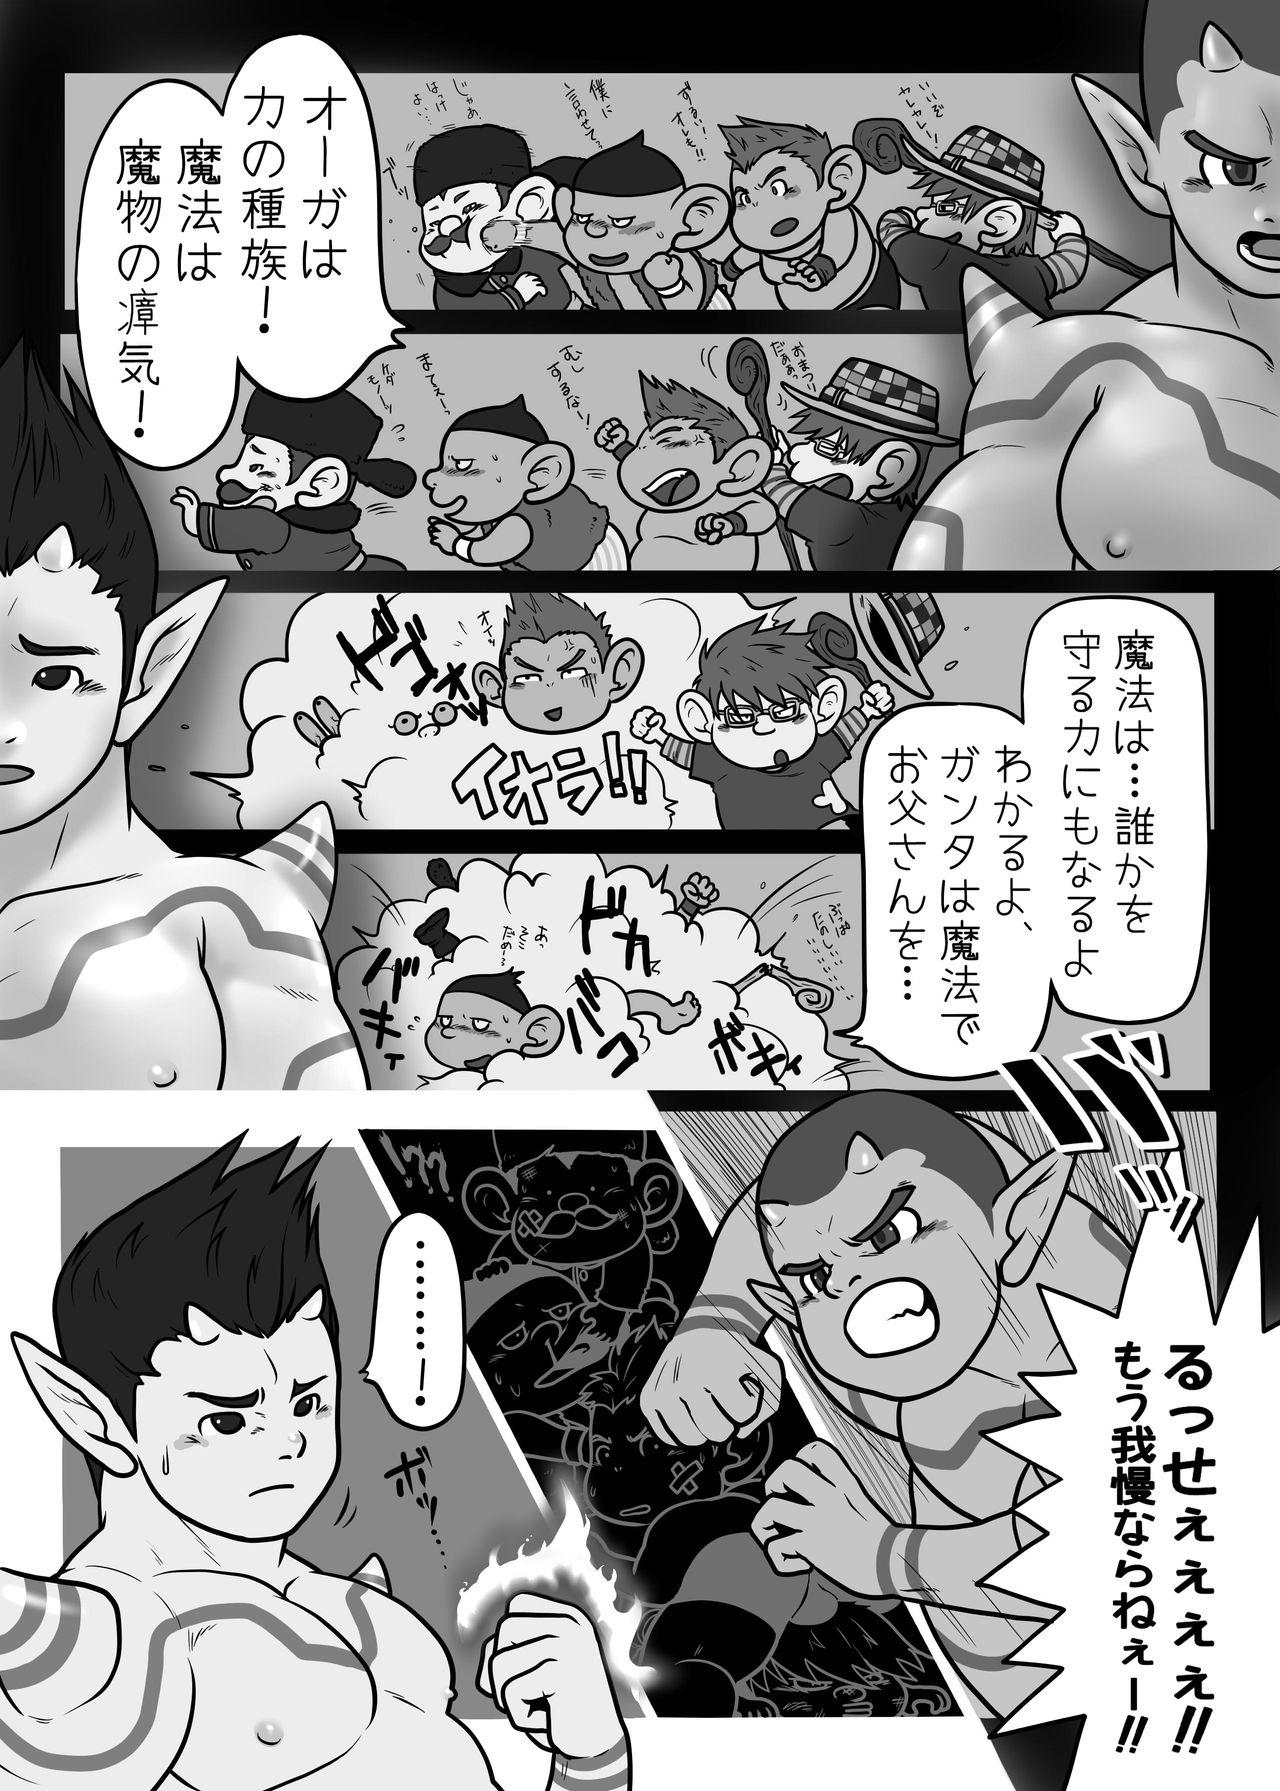 Argentina Ogre to Dwa +Prologue & Epilogue - Dragon quest x Nasty Free Porn - Page 4